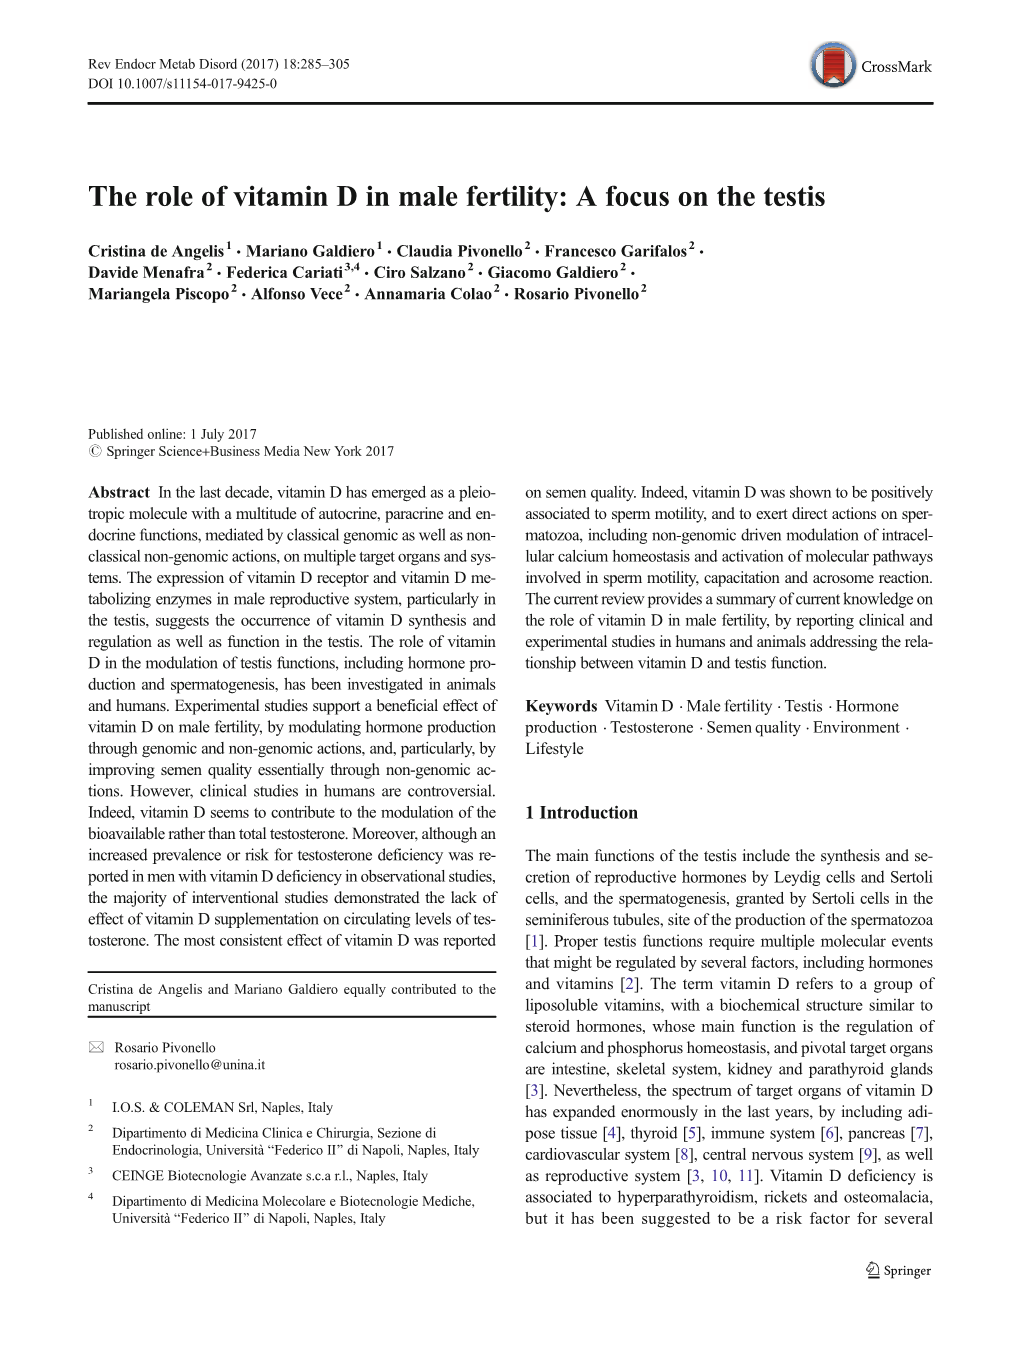 The Role of Vitamin D in Male Fertility: a Focus on the Testis